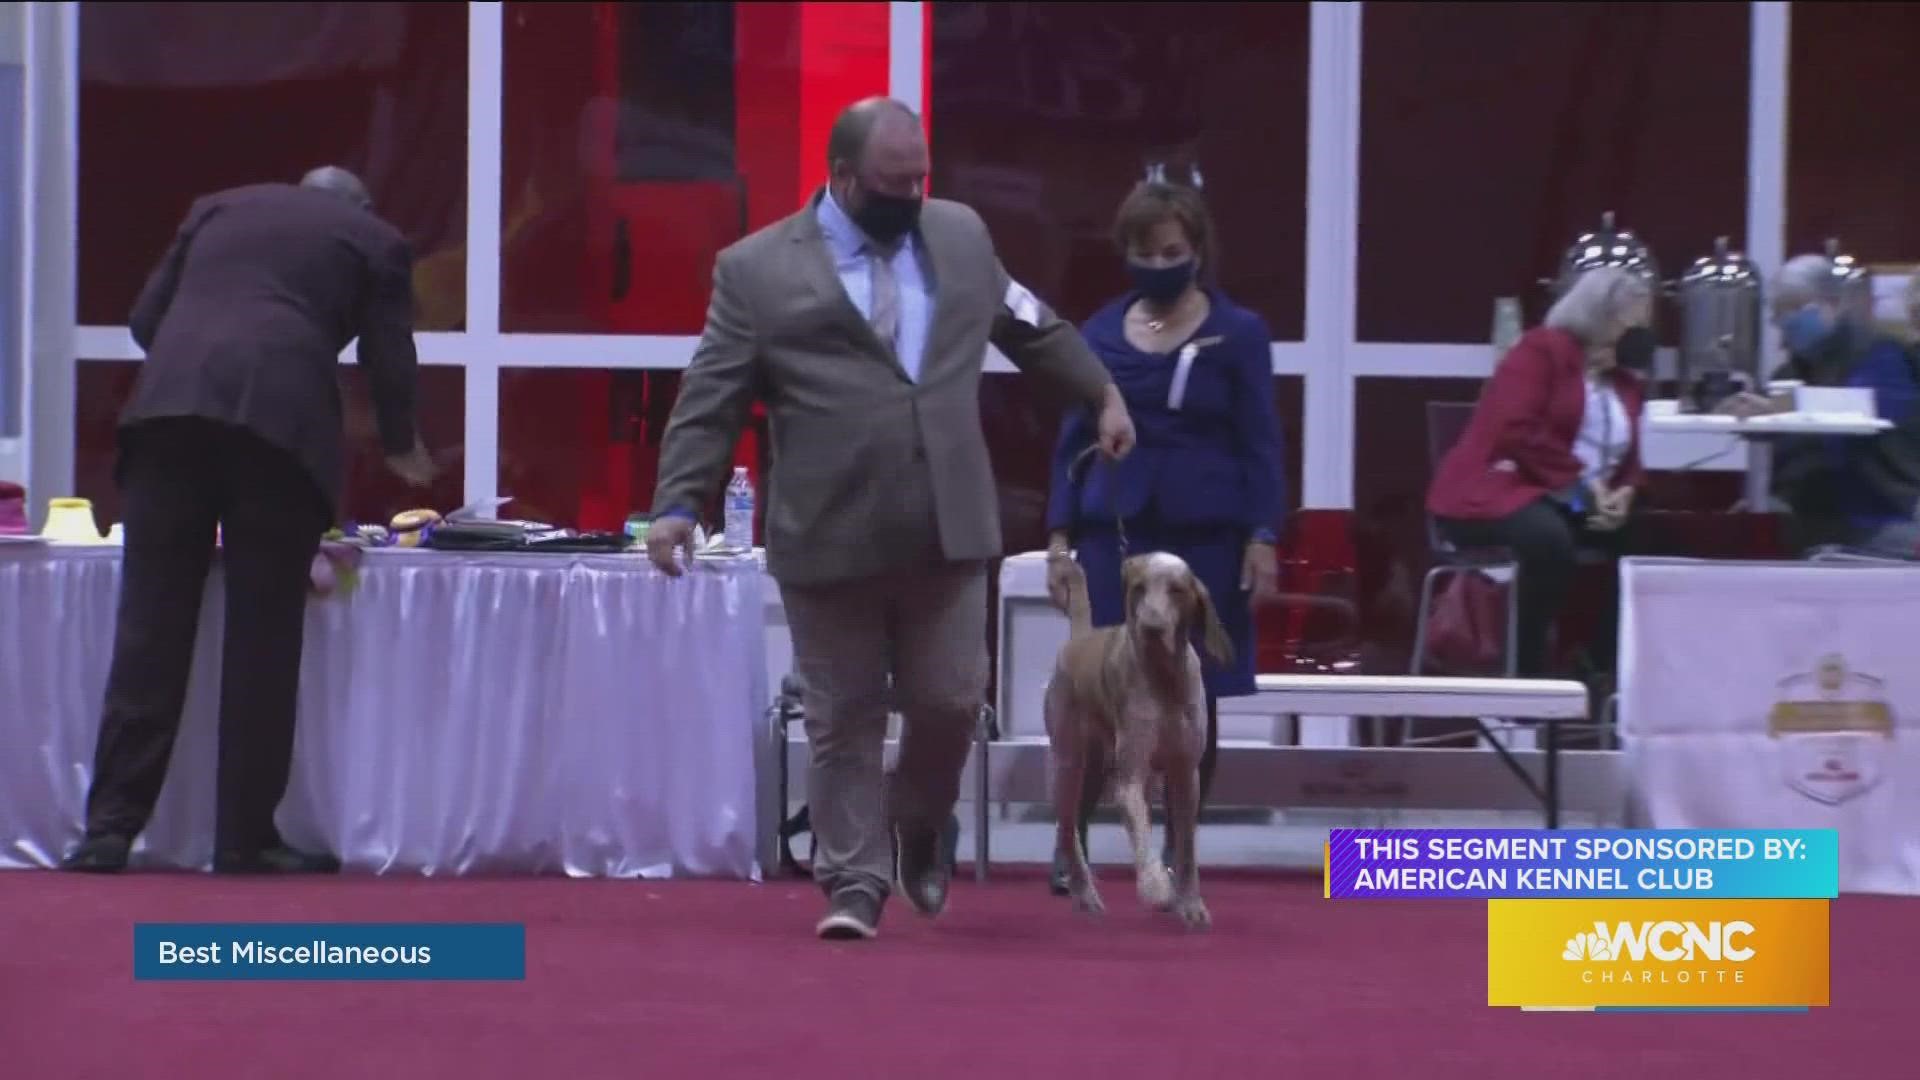 The Bracco Italiano is now recognized by AKC